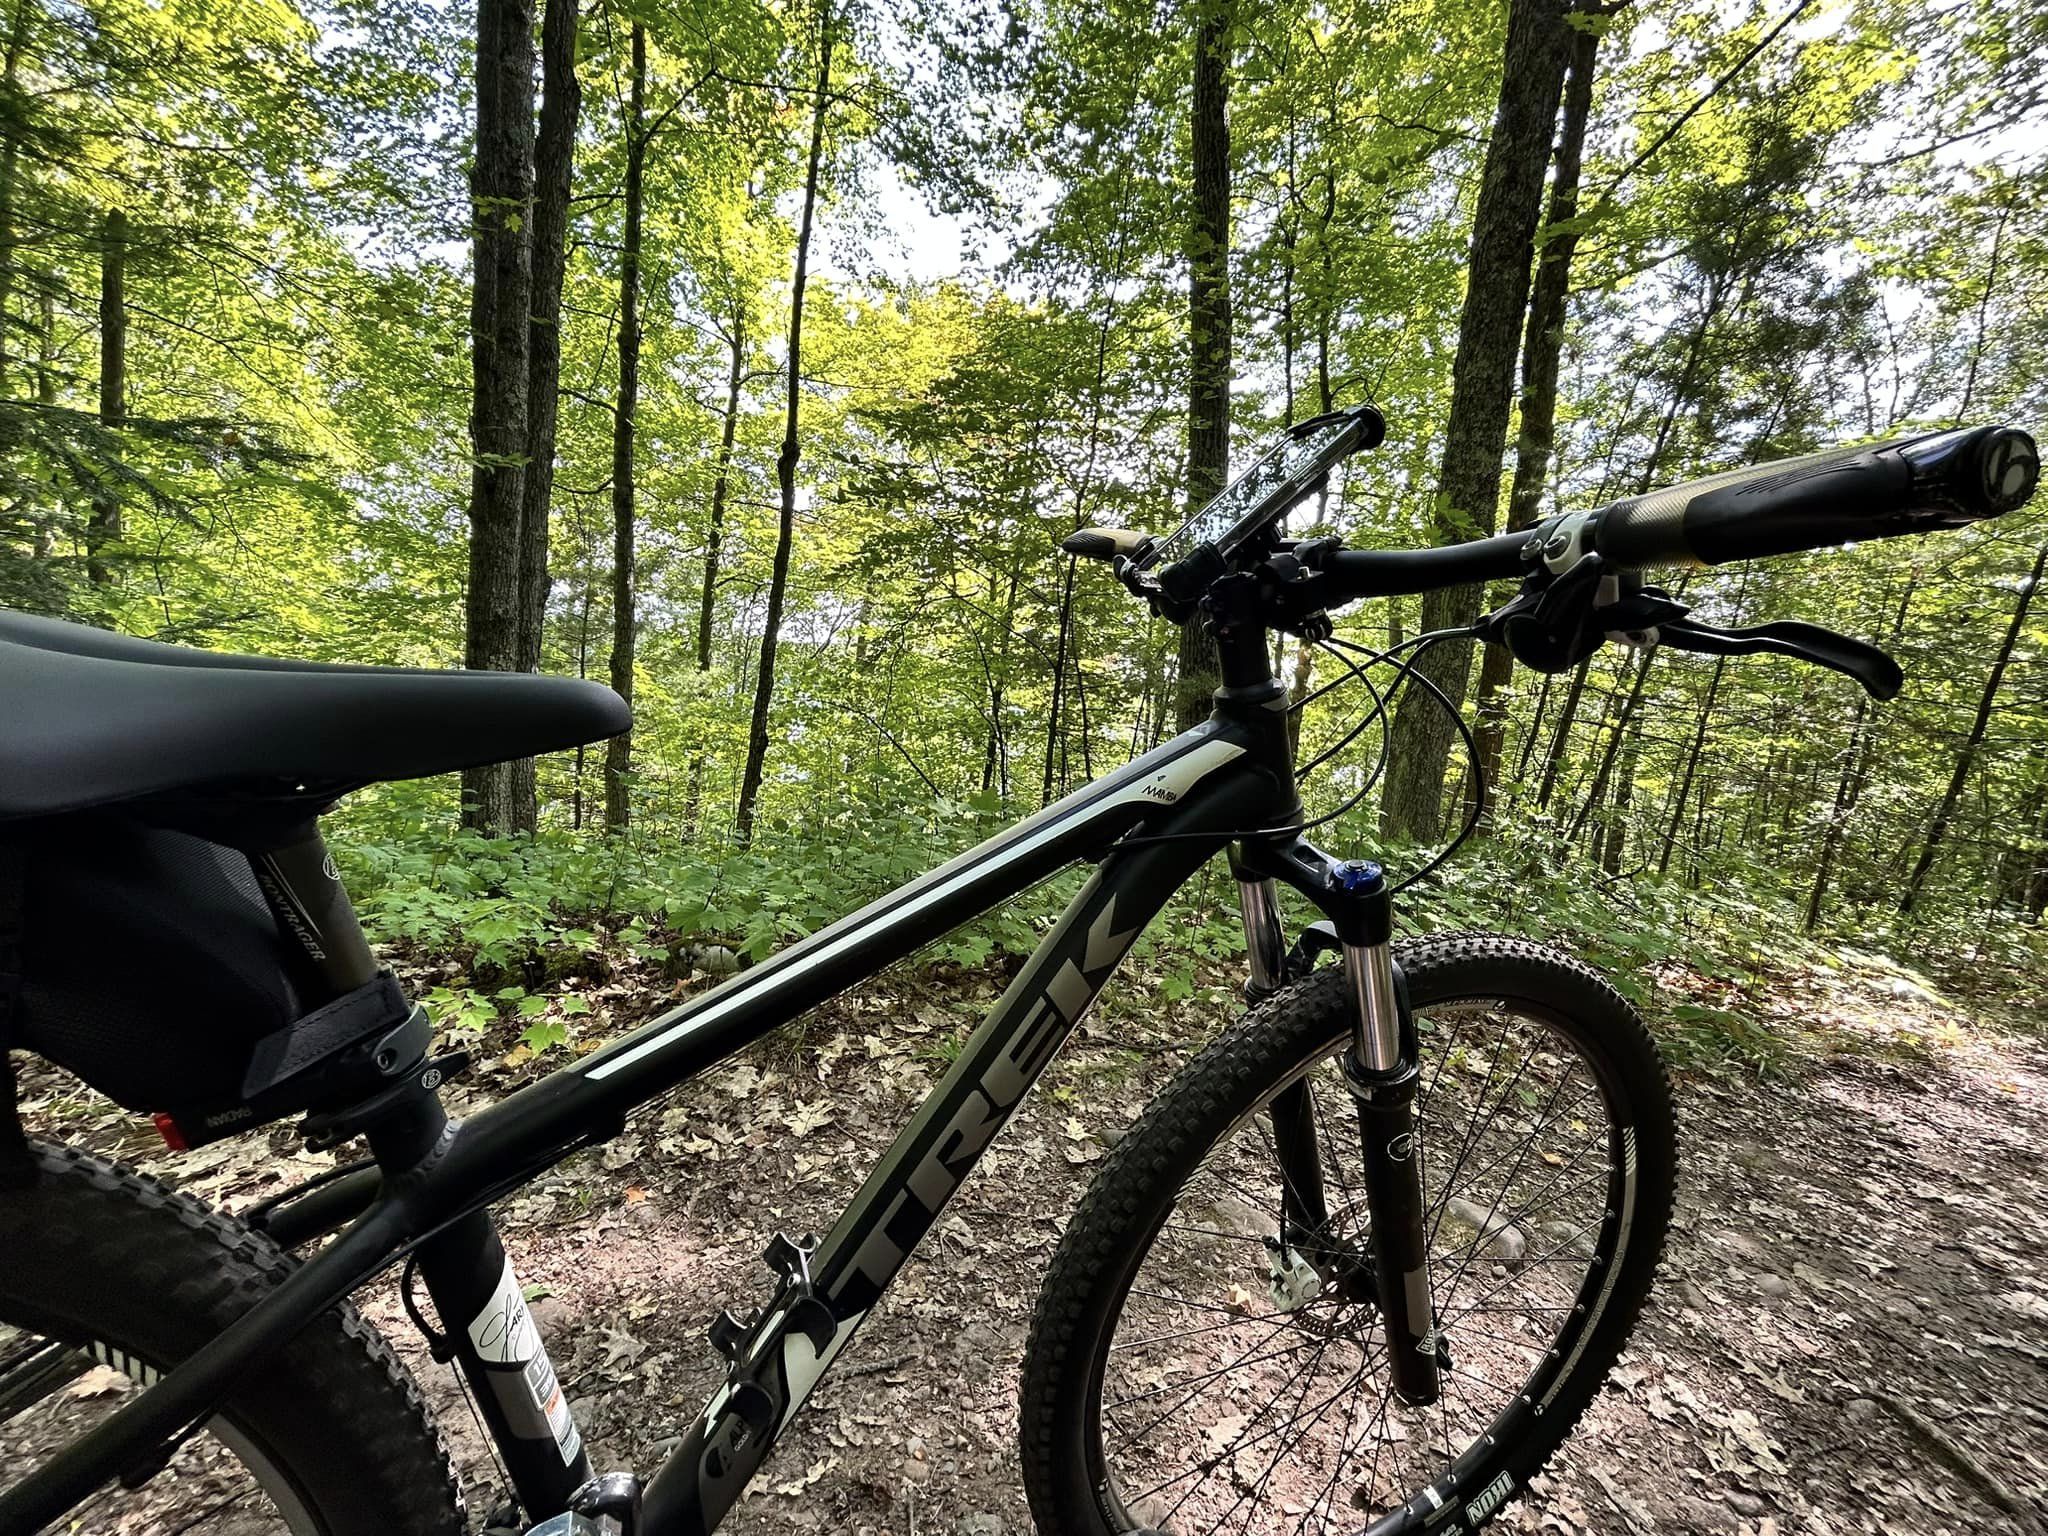 Featured image for “Exploring Nature’s Symphony: Mountain Biking the Raven Trail in Minocqua, Wisconsin”